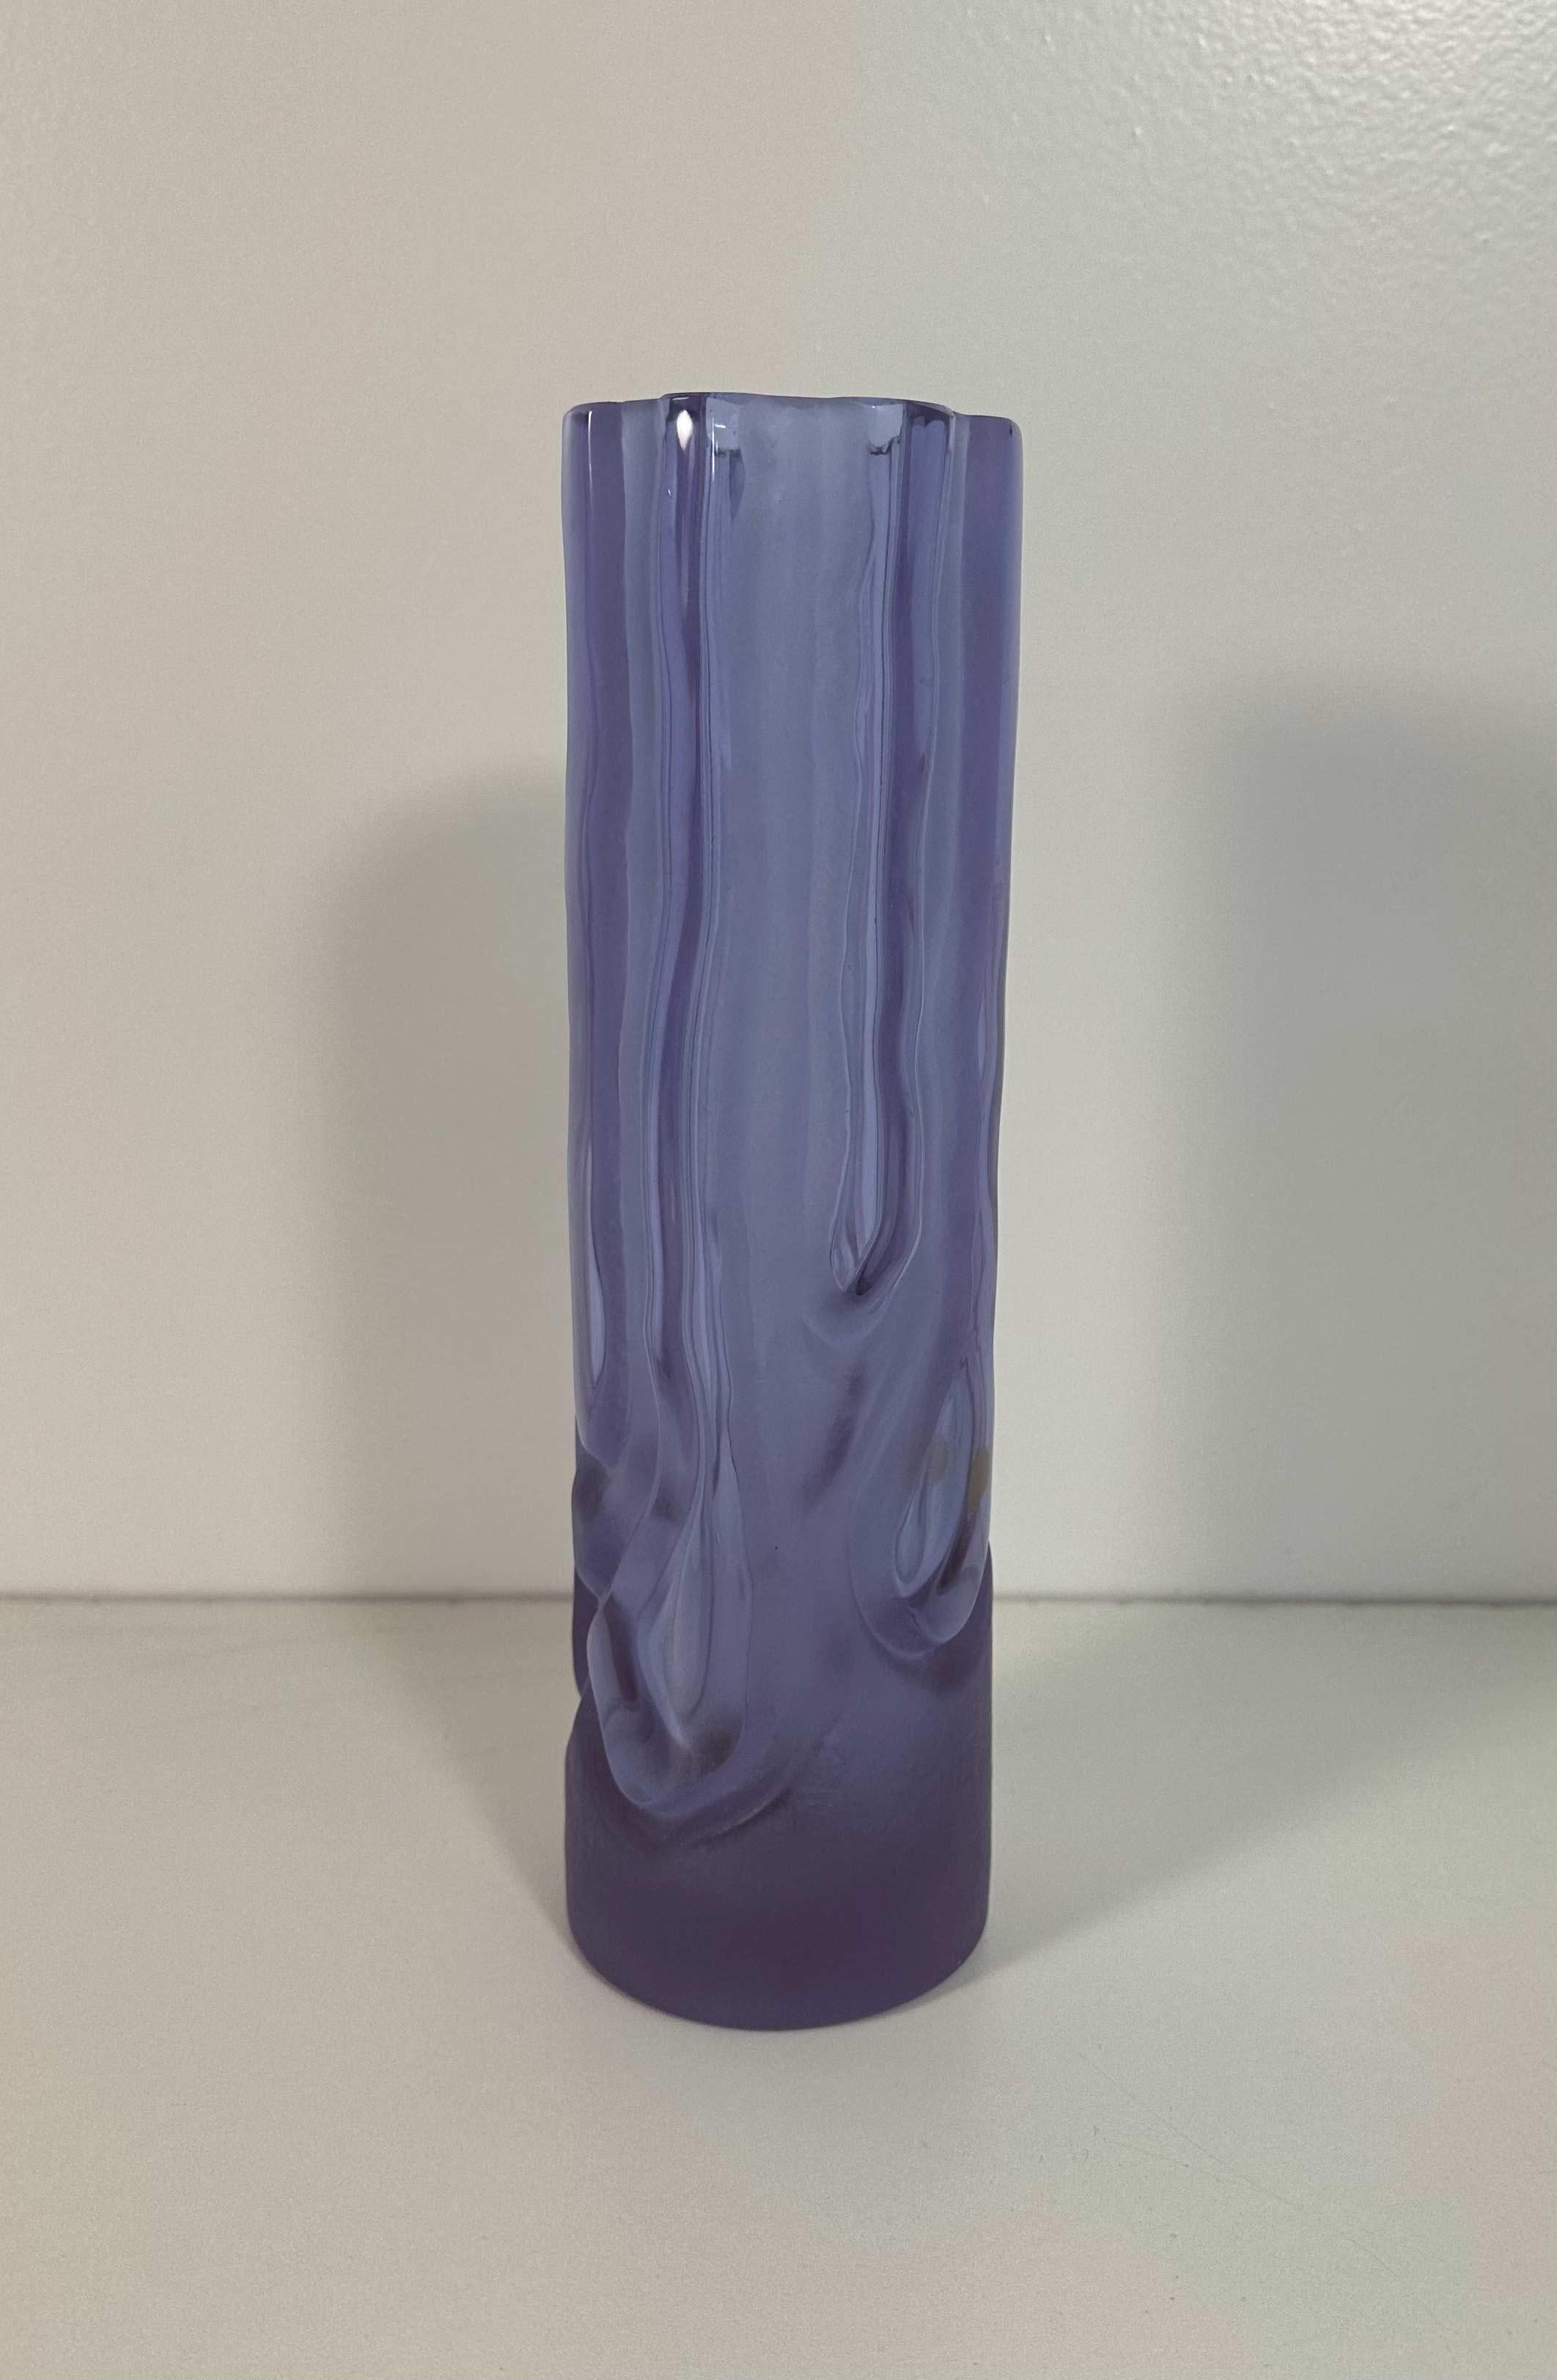 This Violet Vase was produced in Murano, Italy in the 1970s It is made with a particular glass working technique called 'Satinato', which means 'frosted glass'. 
It changes its color with different lighting (it may look blue under some kind of